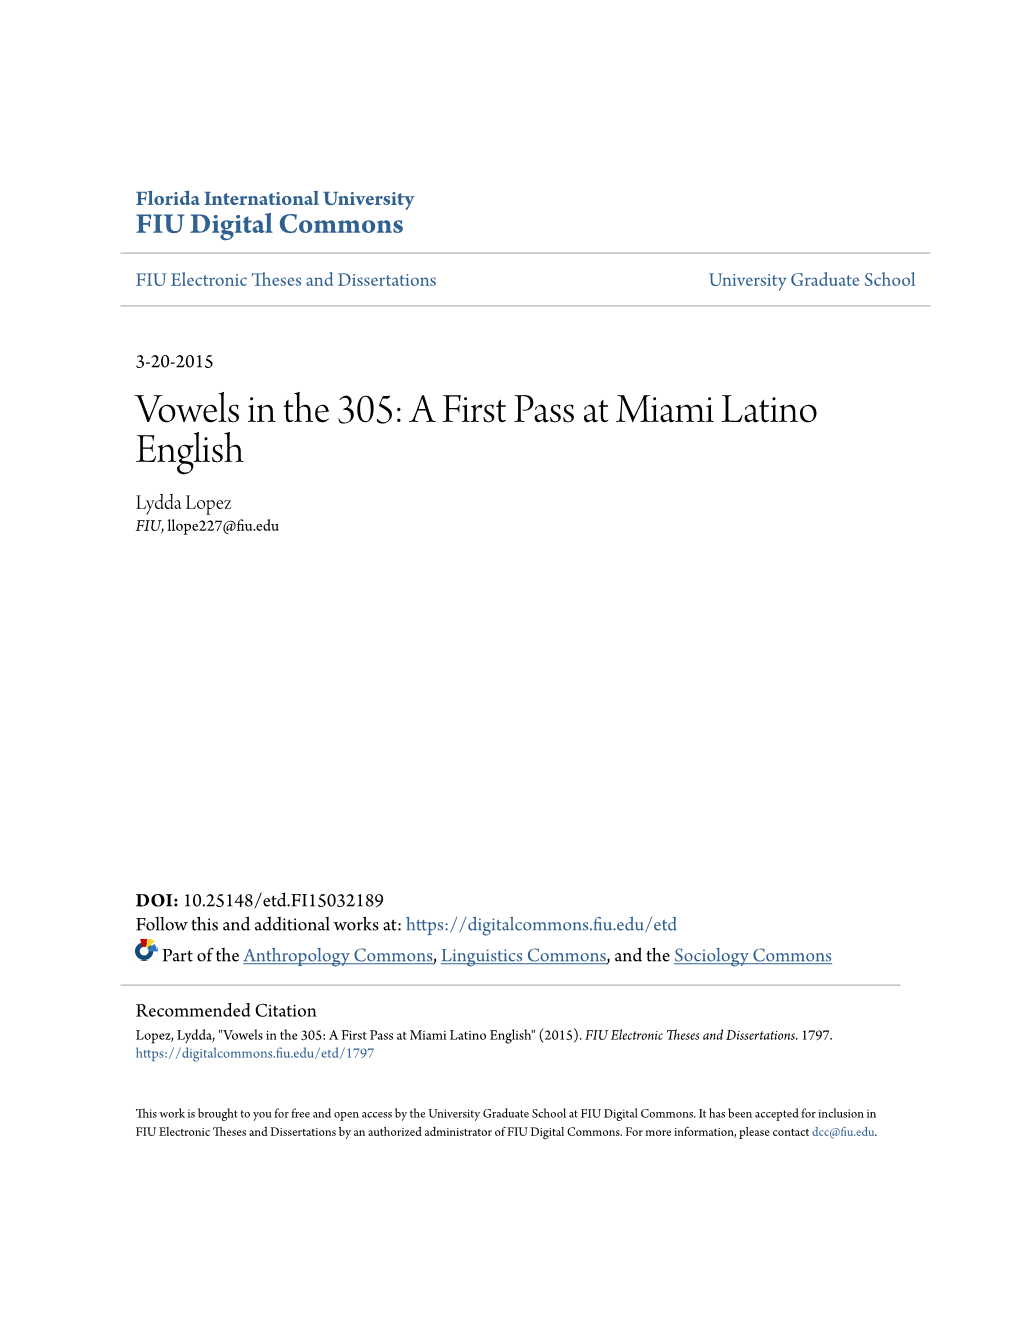 Vowels in the 305: a First Pass at Miami Latino English Lydda Lopez FIU, Llope227@Fiu.Edu